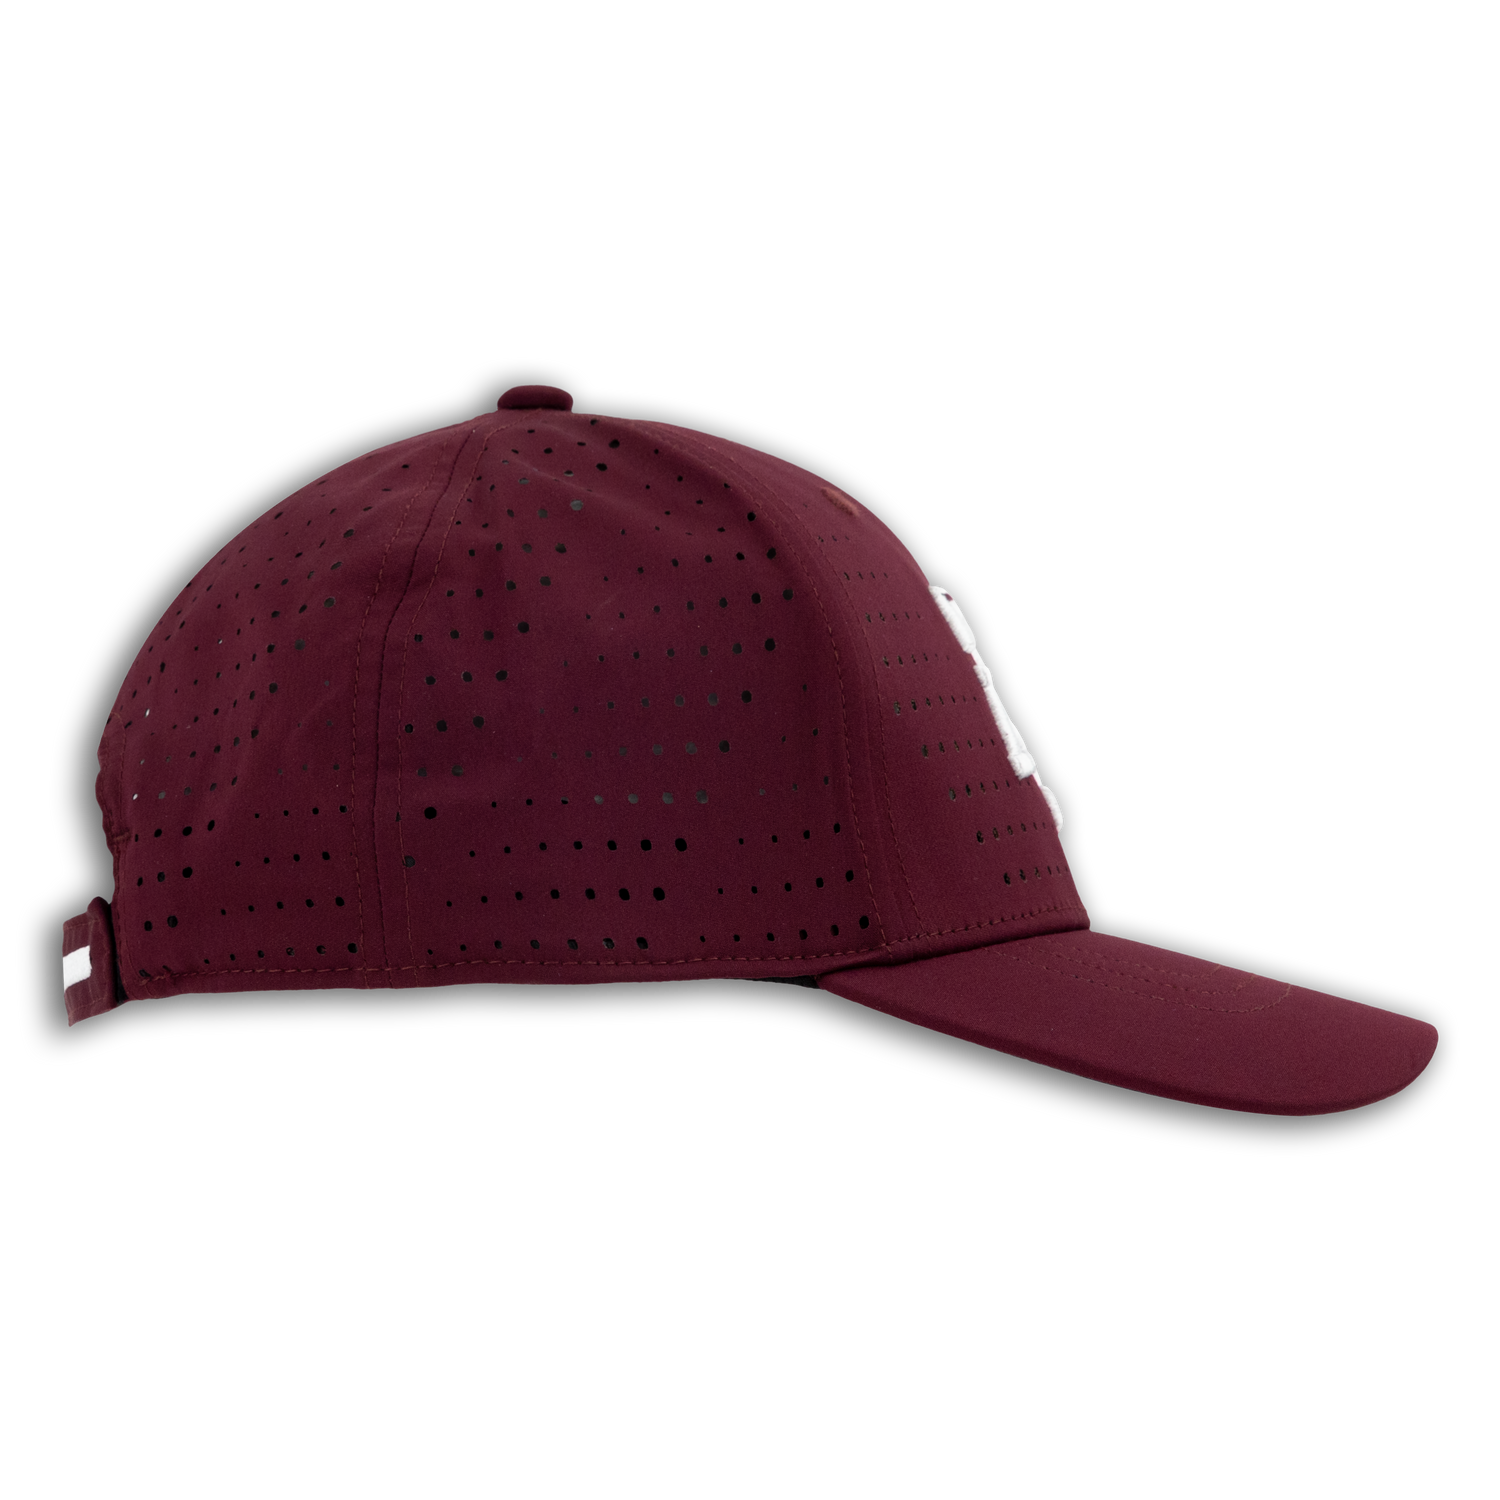 Texas A&M Adidas Structured Hat